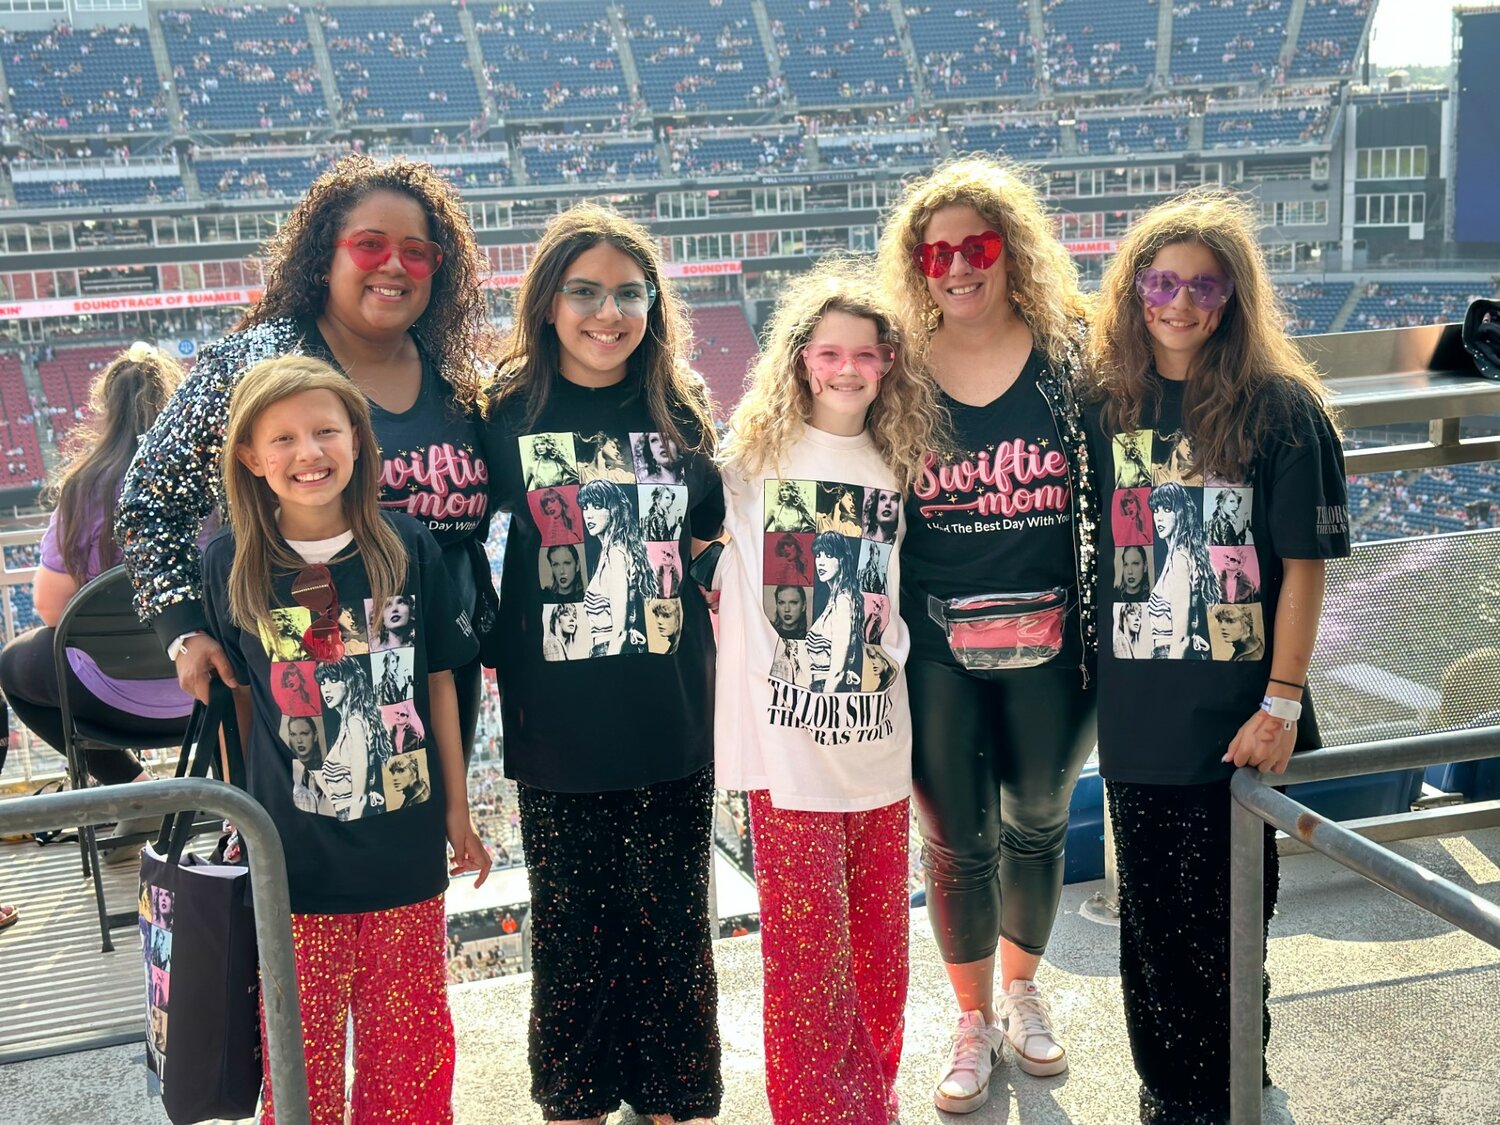 Moms Madeline Crowell (left) and Katie Grifka (second from right), of Bristol, went to the Sunday show with their daughters, Sophia and Alana Crowell, and Gabriella and Giuliana Grifka. Madline wrote: “The concert was incredible! Wow, what a show!”